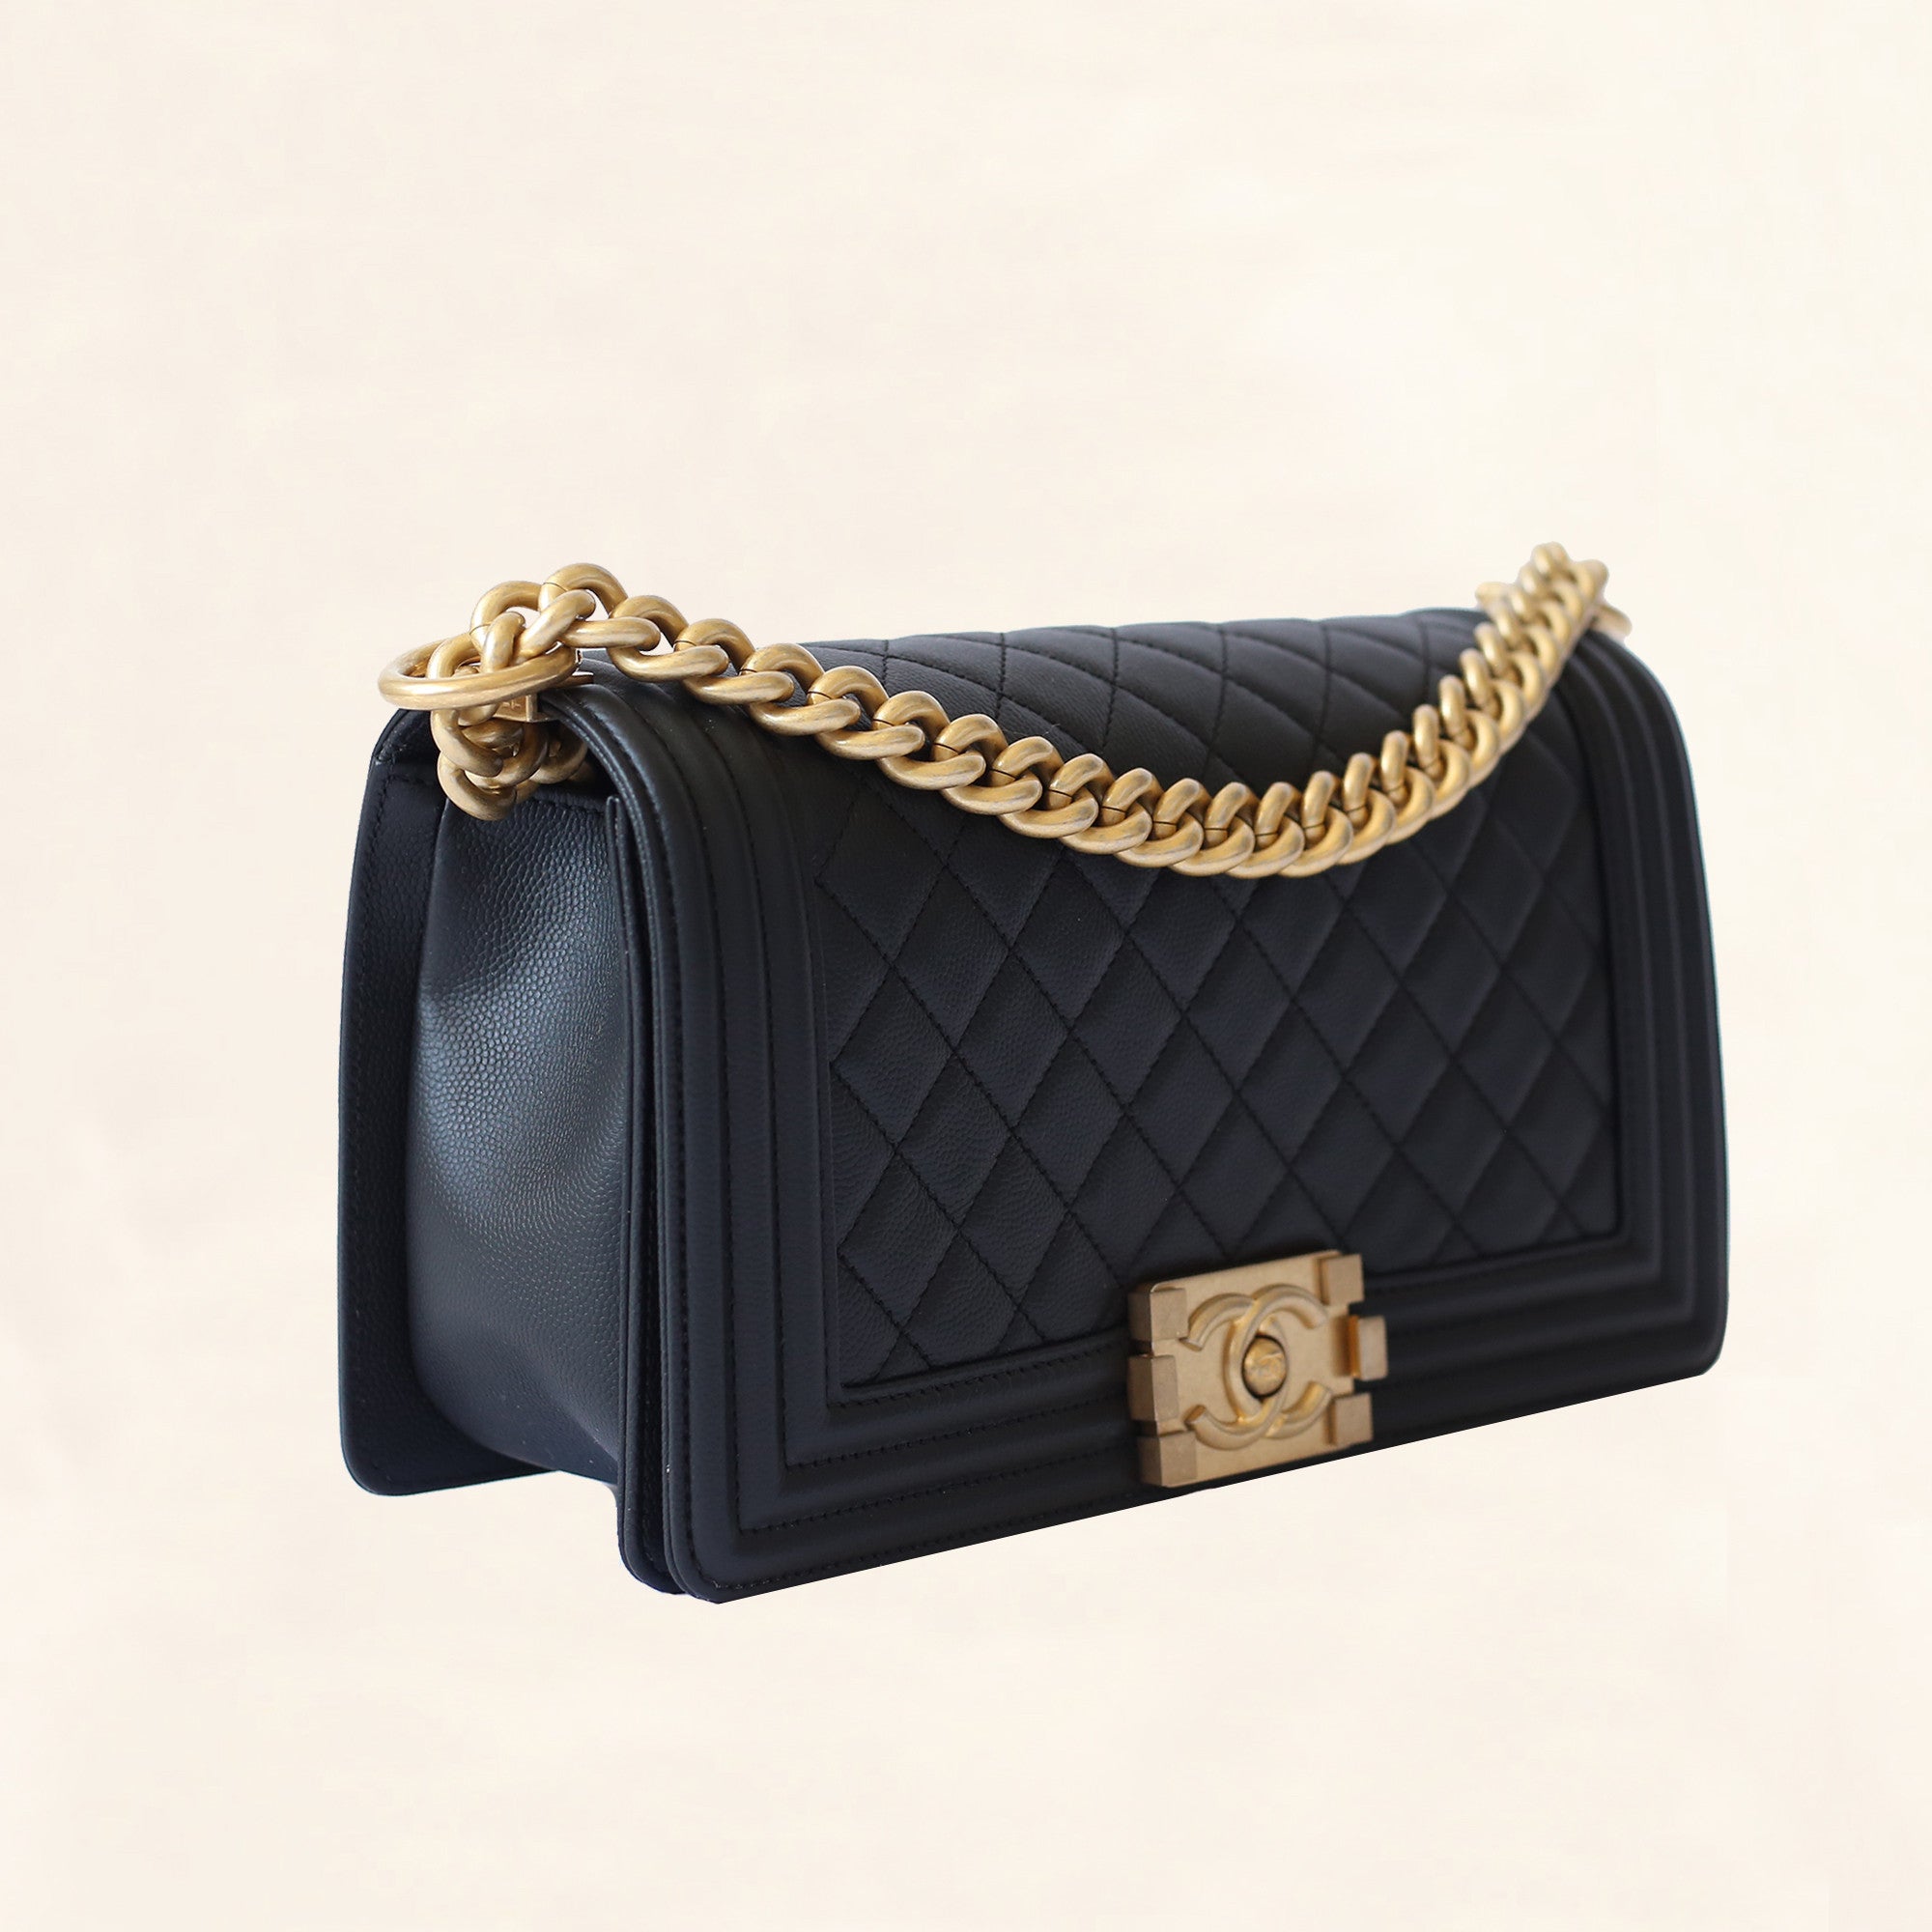 Chanel | Caviar Boy Bag with Aged Gold Hardware | Old Medium - The ...